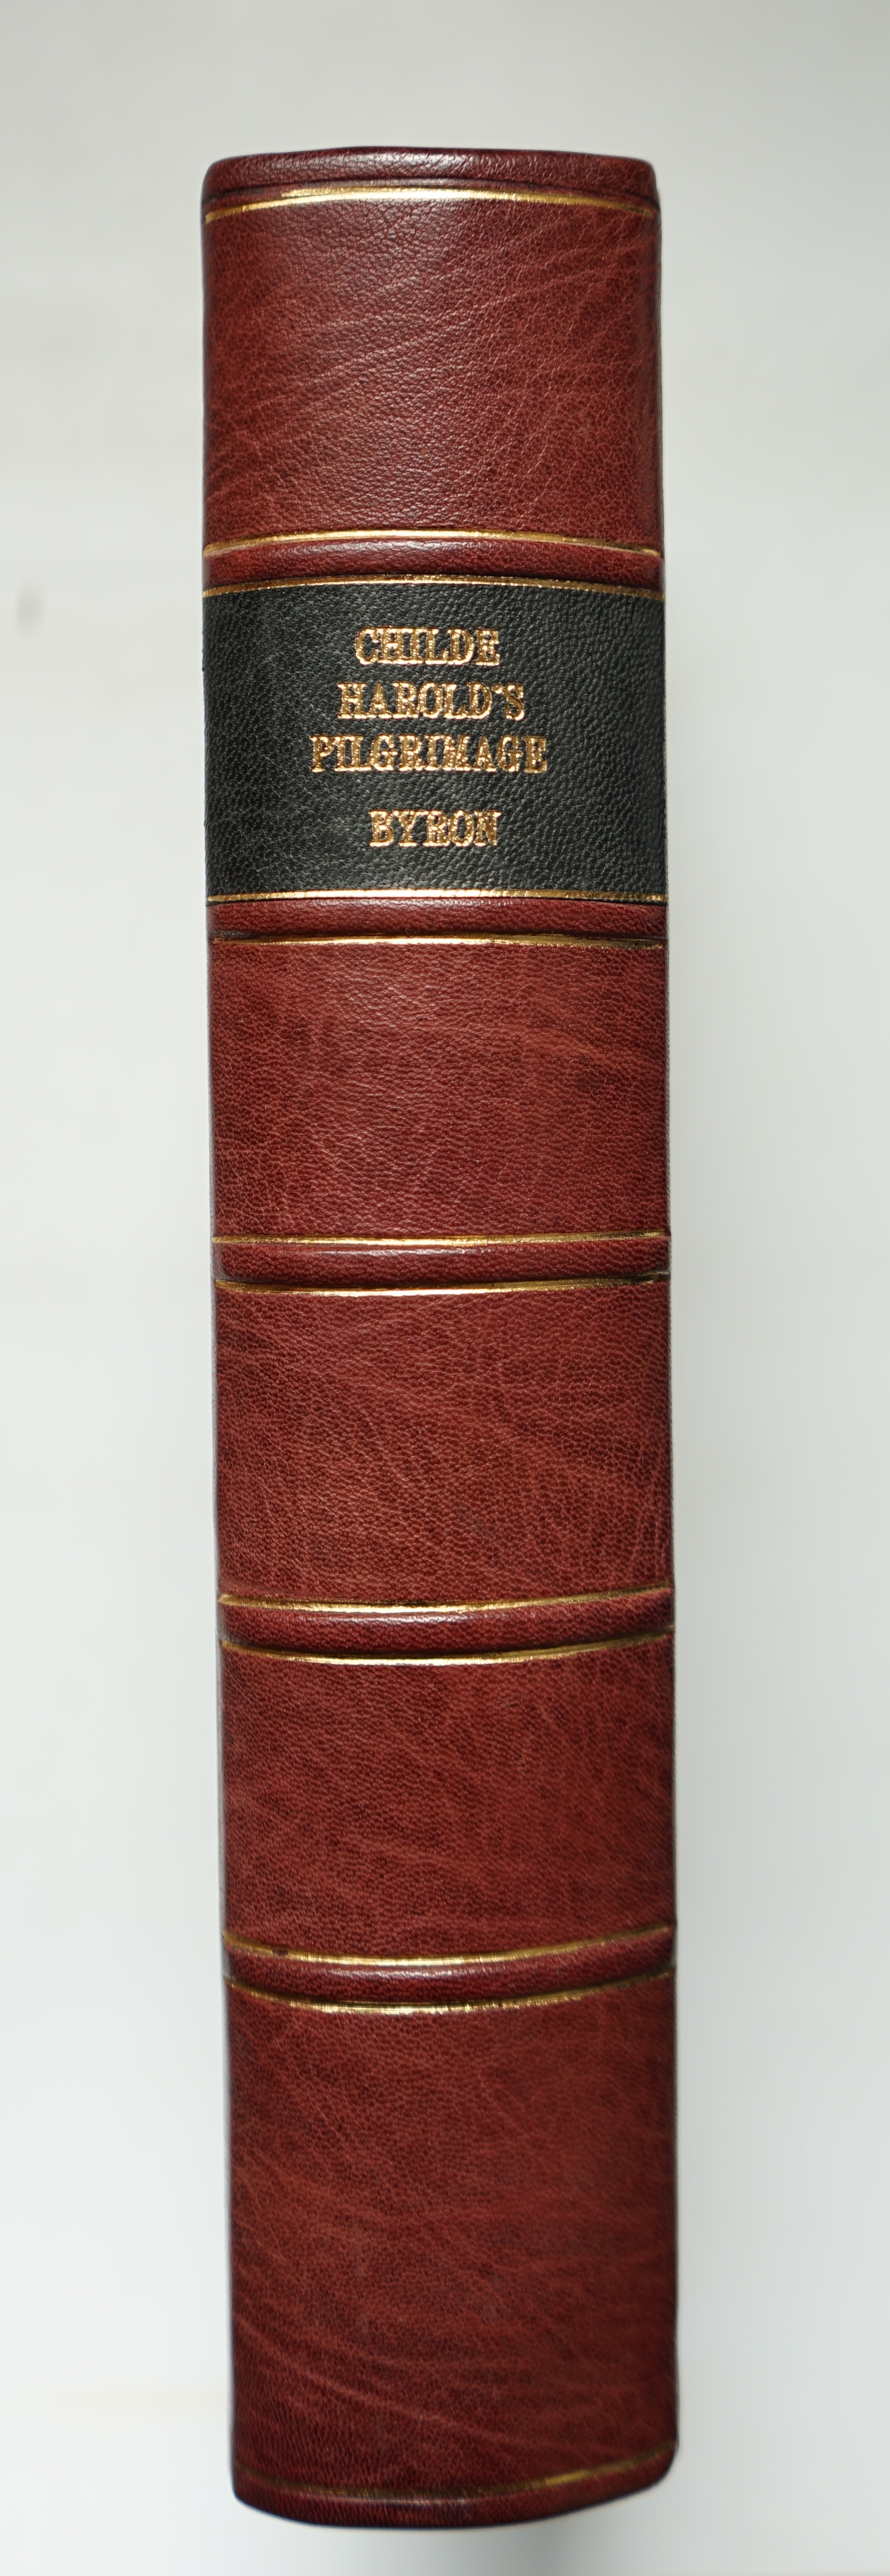 Byron, George Gordon Noel, Lord - Childe Harold’s Pilgrimage, with portrait frontis, engraved title and 60 vignettes by the brothers Finden, folding map at end 8vo, rebacked gilt tooled calf, endpapers renewed, John Murr